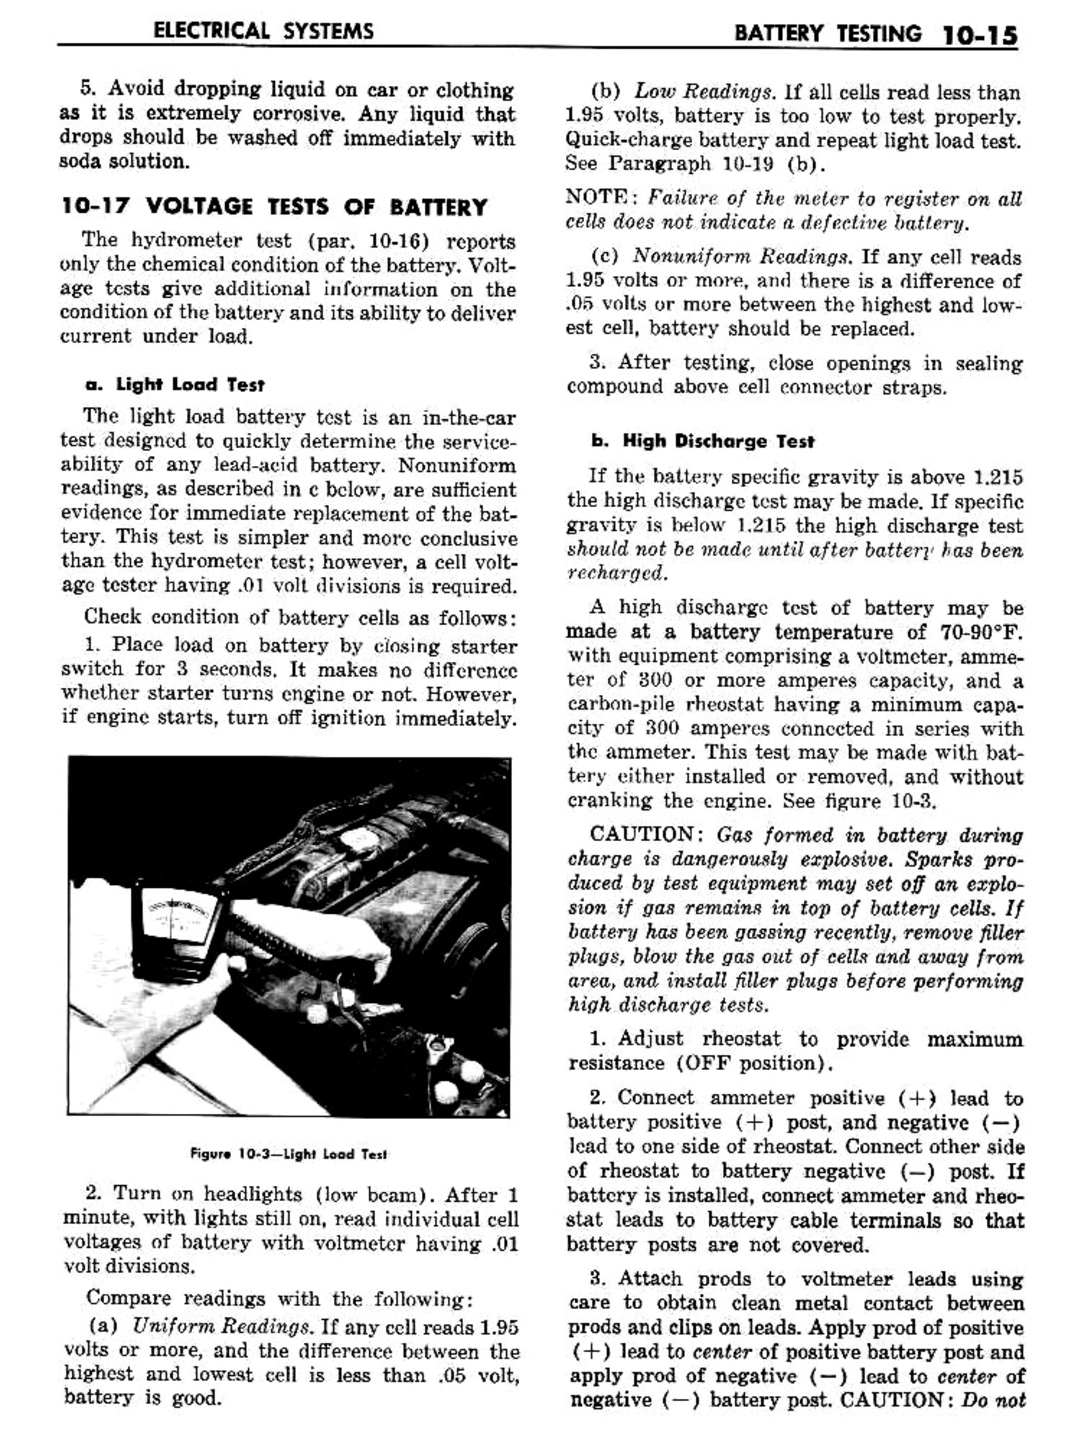 n_11 1960 Buick Shop Manual - Electrical Systems-015-015.jpg